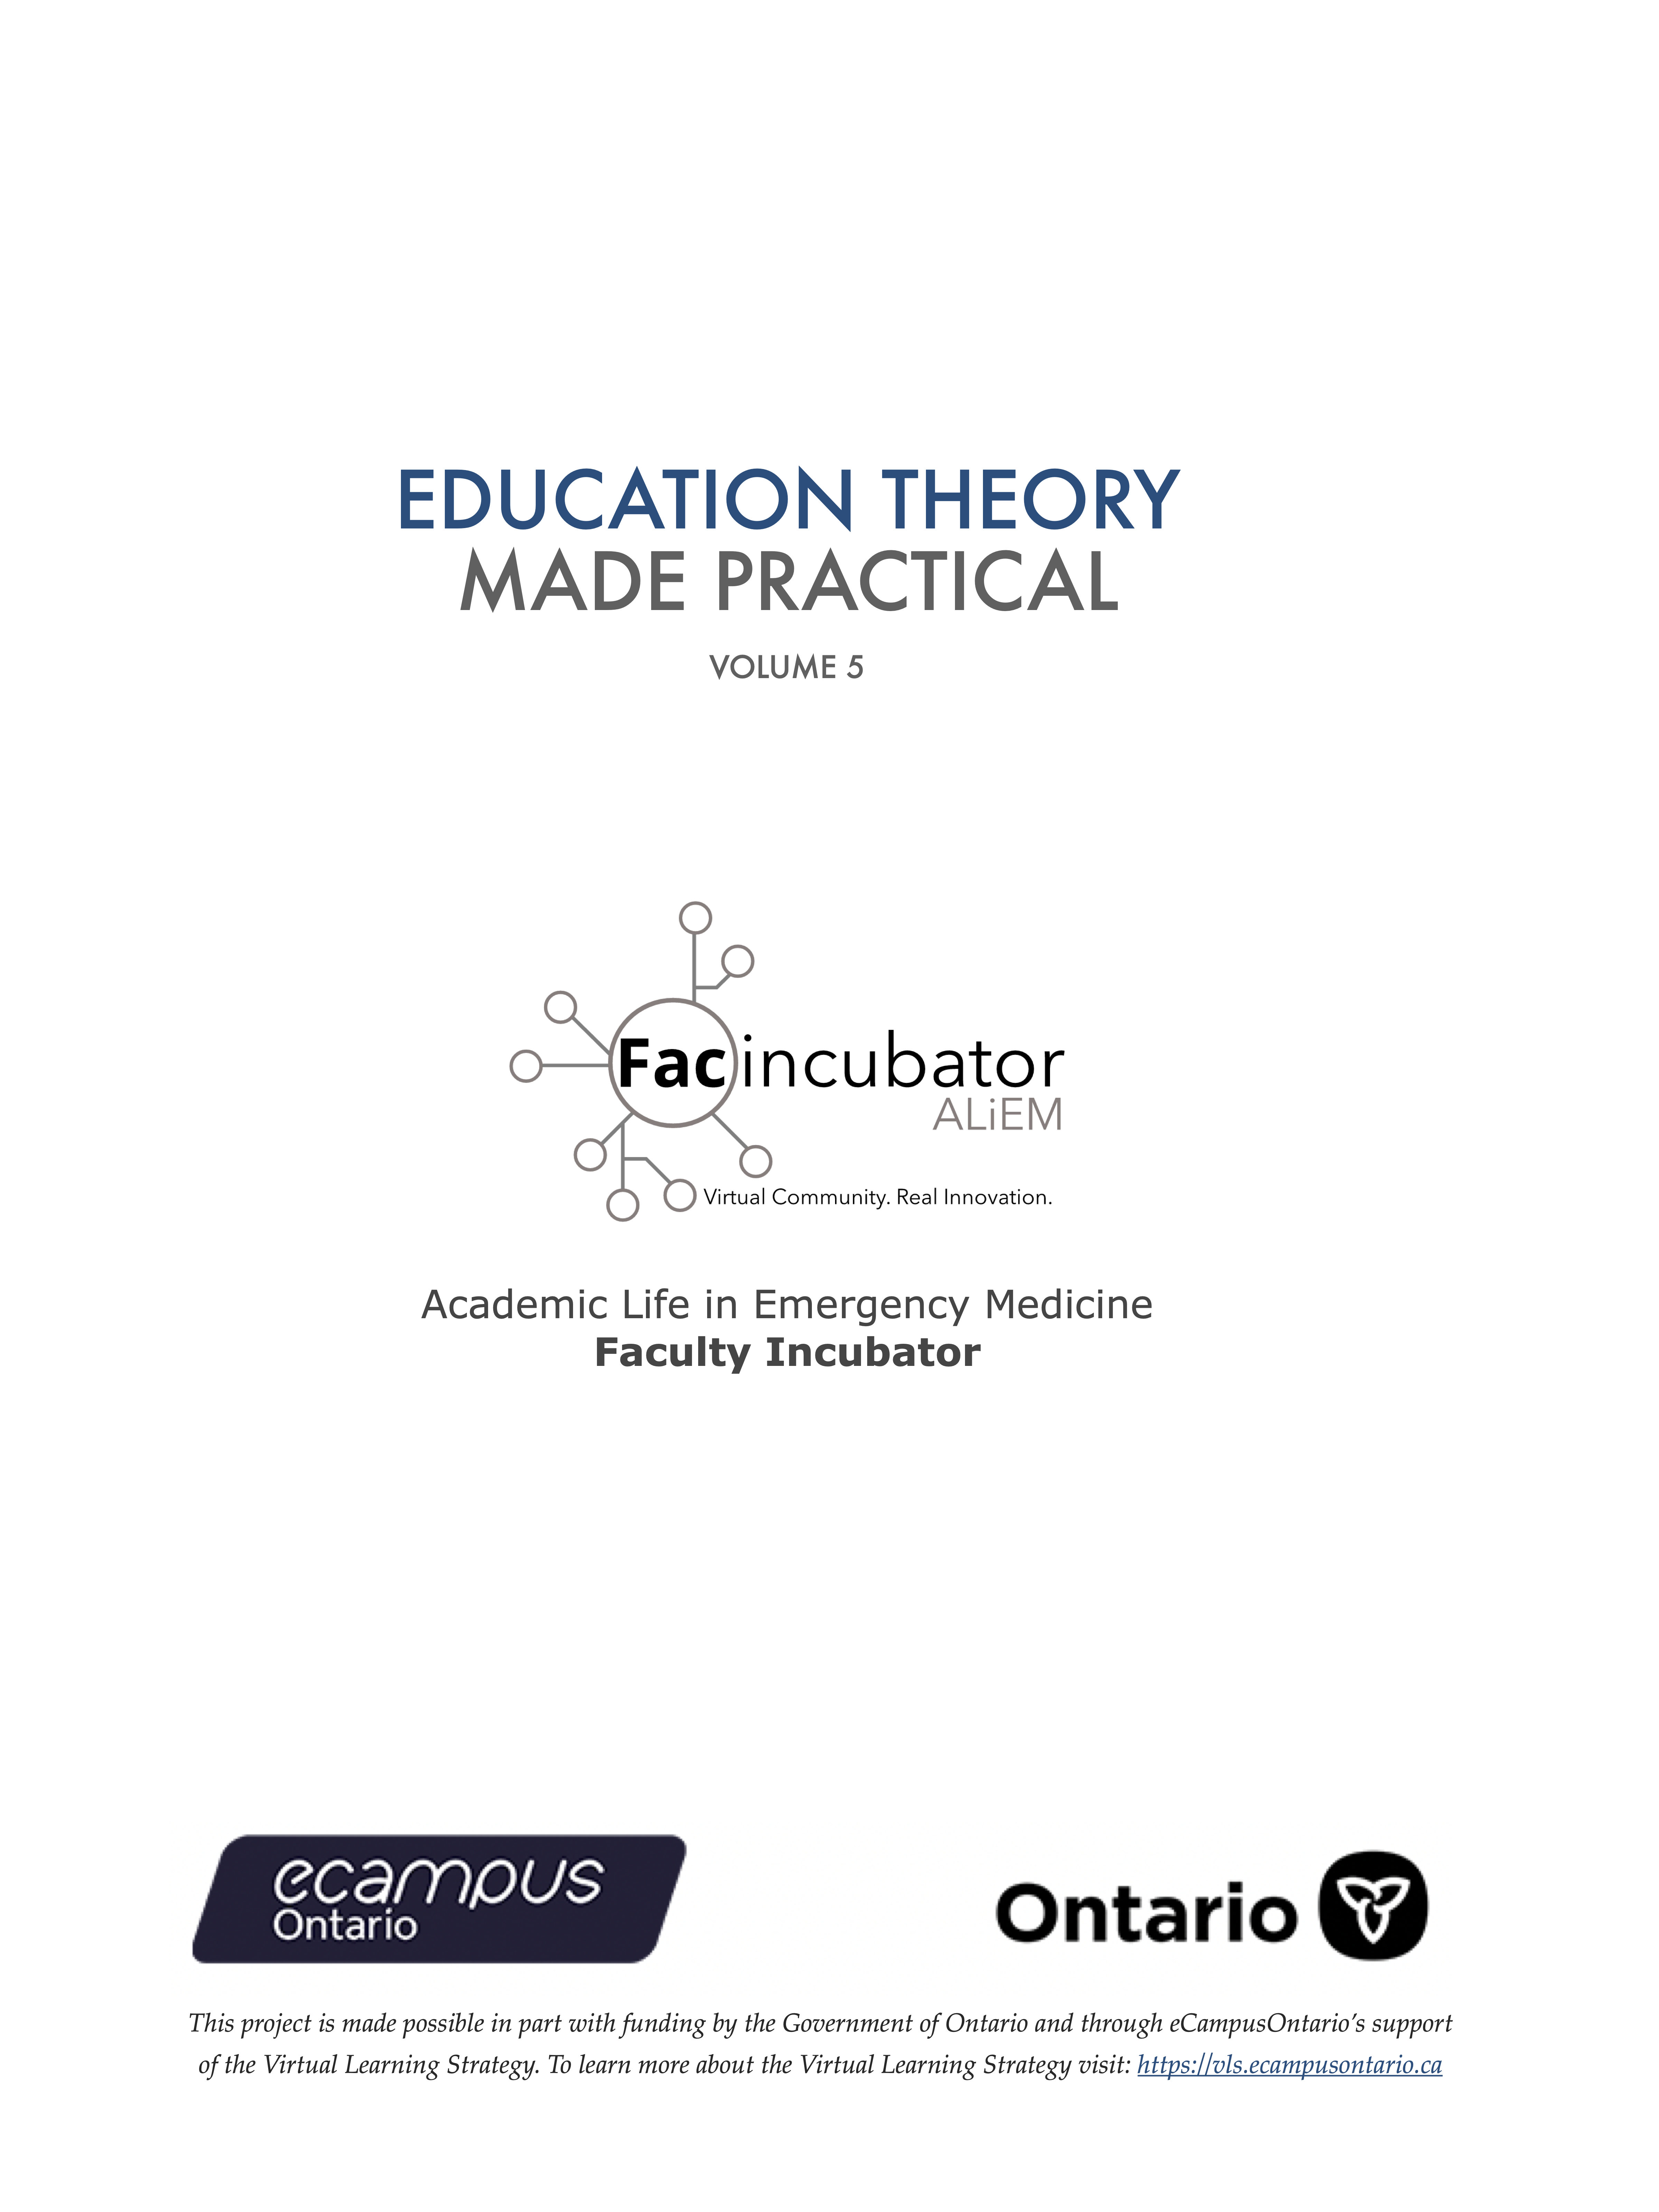 Education Theory Made Practical Volume 5. Academic Life in Emergency Medicine, Faculty Incubator. This project is made possible in part with funding by the Government of Ontario and through eCampusOntario’s support of the Virtual Learning Strategy. To learn more about the Virtual Learning Strategy visit: https://vls.ecampusontario.ca